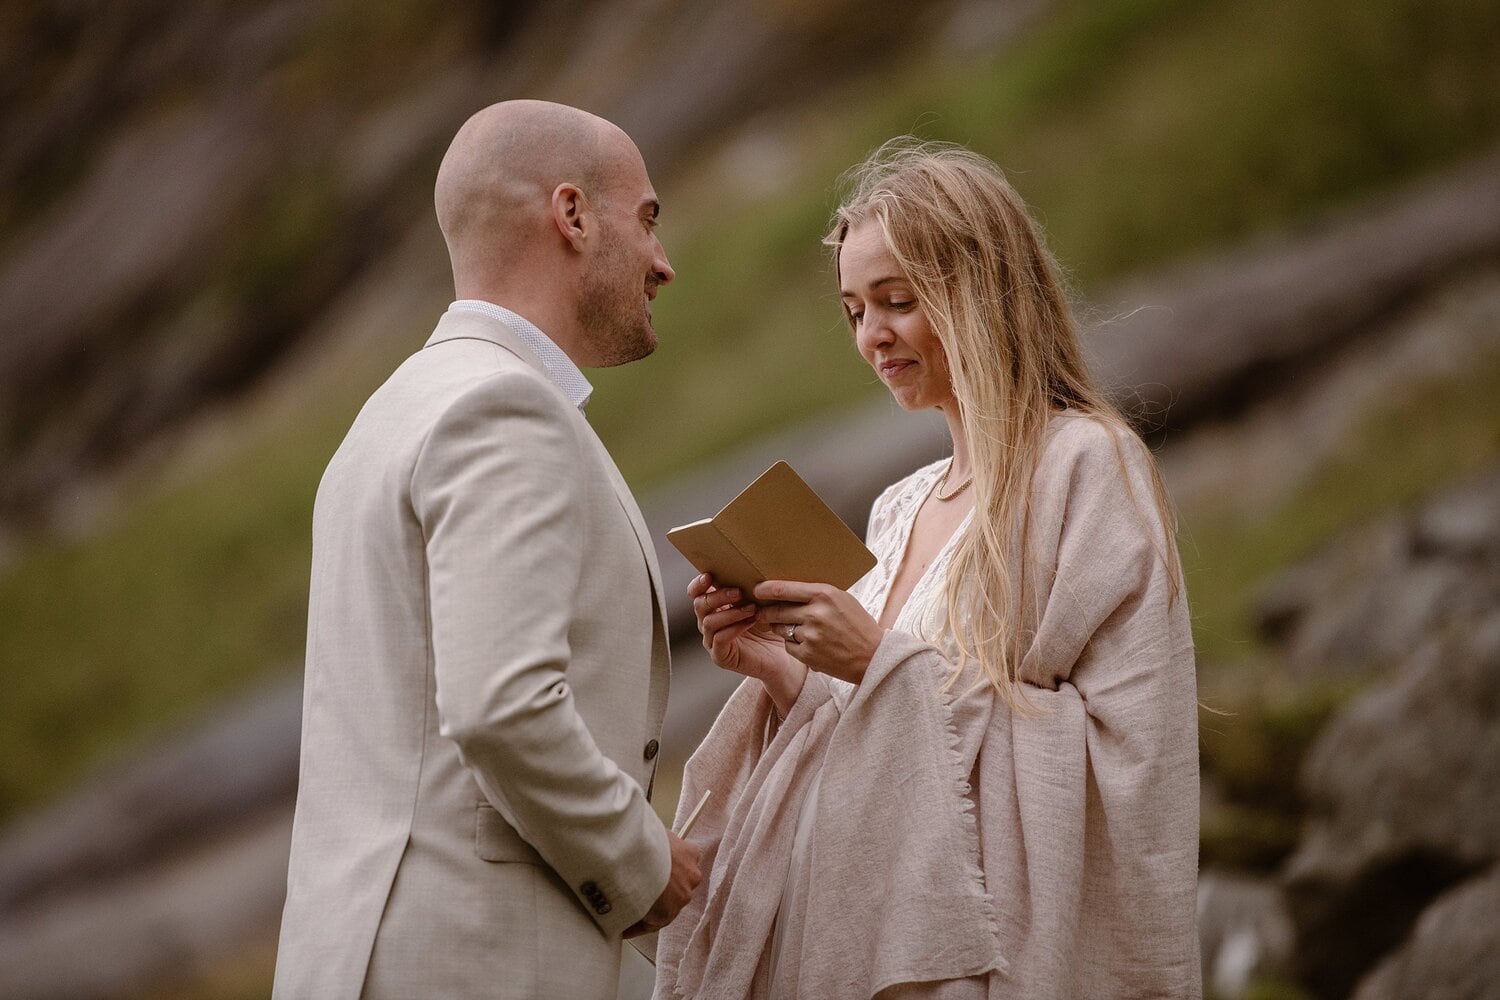 Bride reads her vows during intimate elopement ceremony on a beach in Norway.